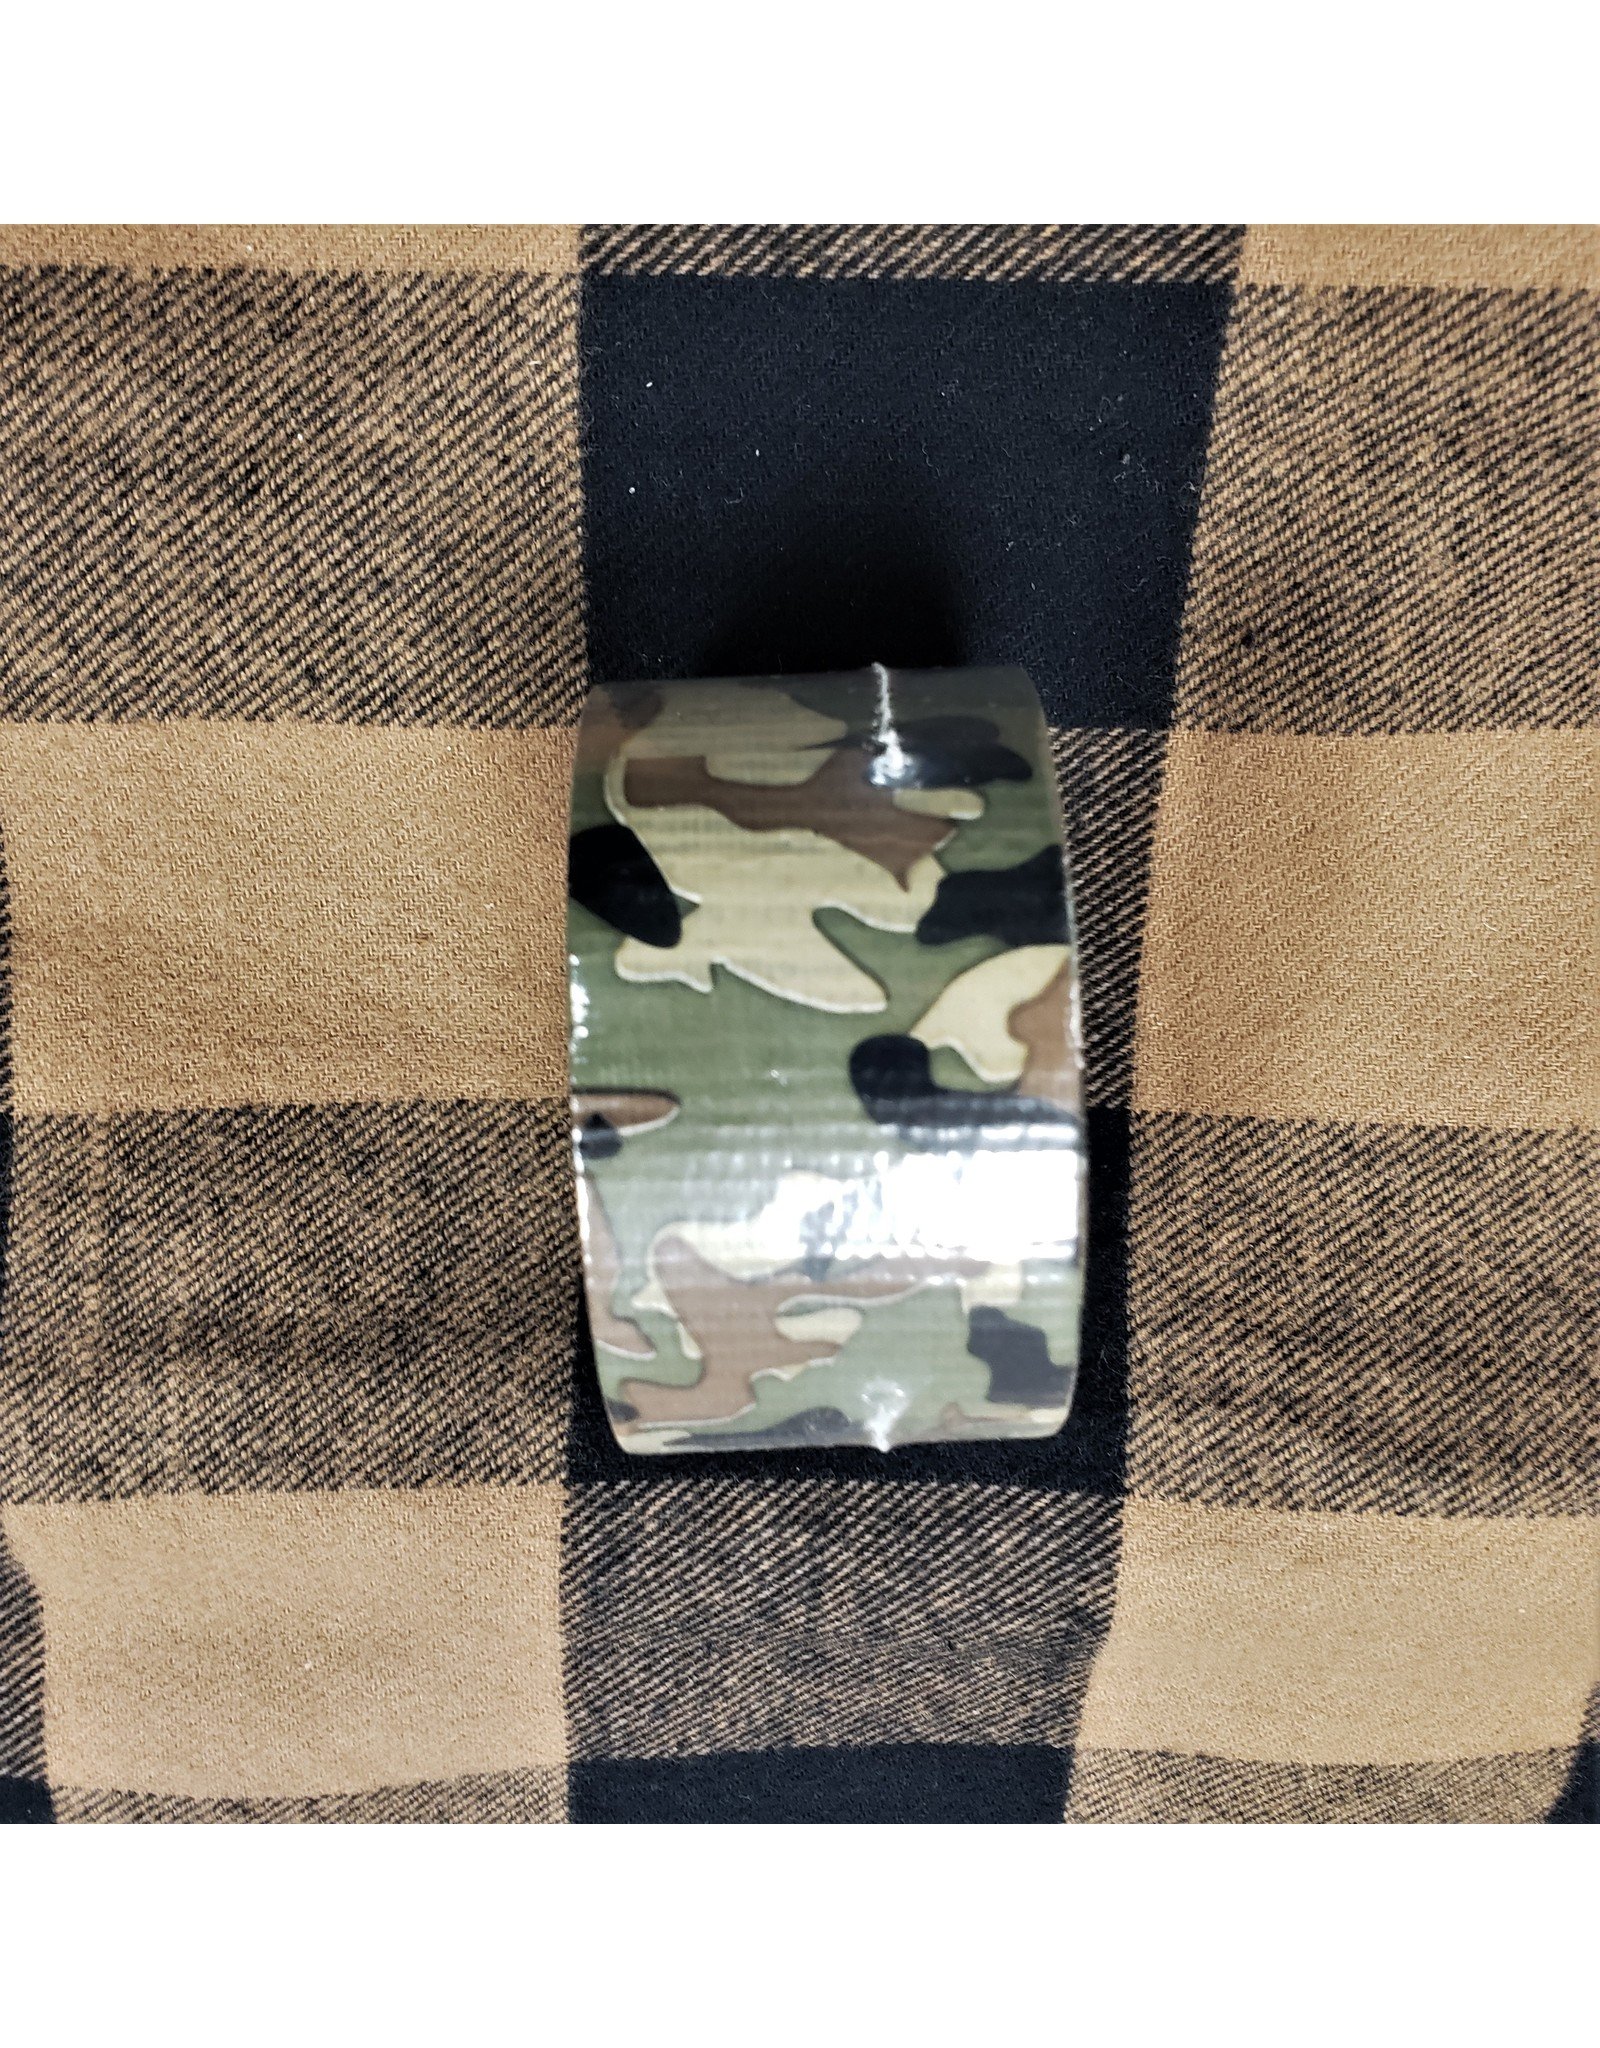 FOX TACTICAL GEAR CAMOUFLAGE DUCT TAPE 1.88IN X 10YD